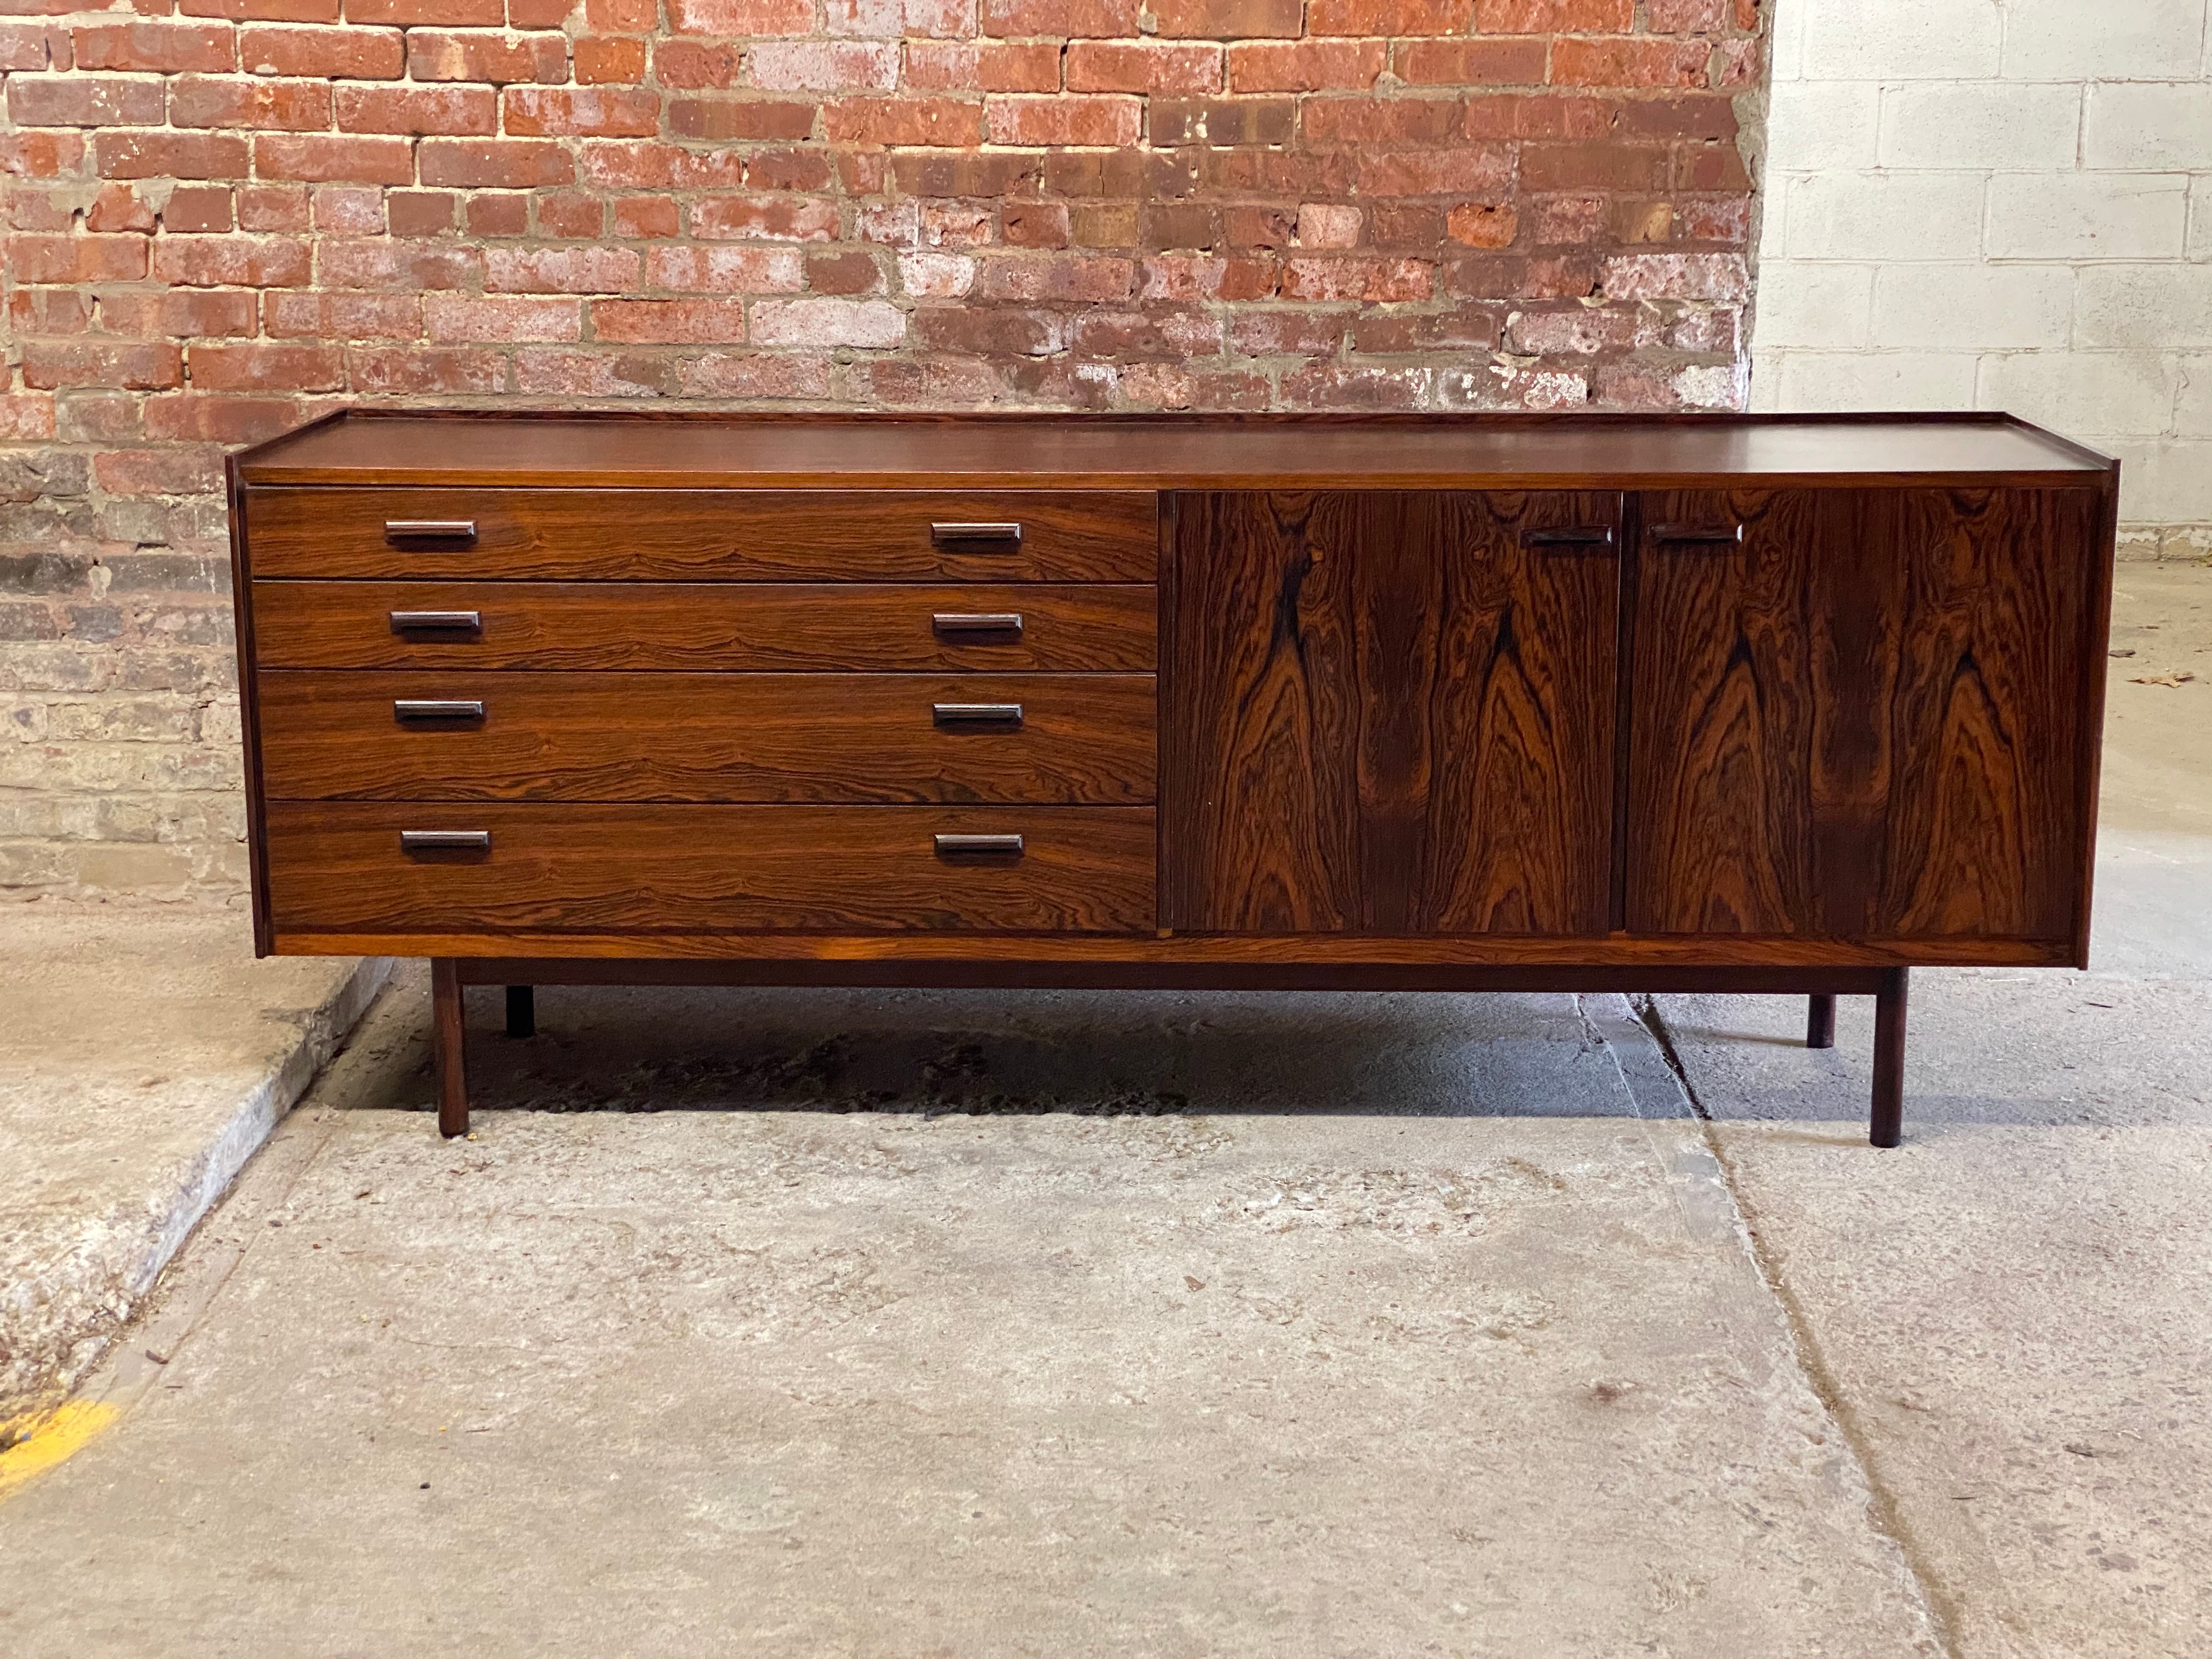 Tremendous figured rosewood Danish sideboard. Circa 1960-70. Exceptional quality. Danish Control tag in one drawer. Featuring four drawers and two doors with adjustable height shelves, sliding vanity tray, solid rosewood front interior drawers and